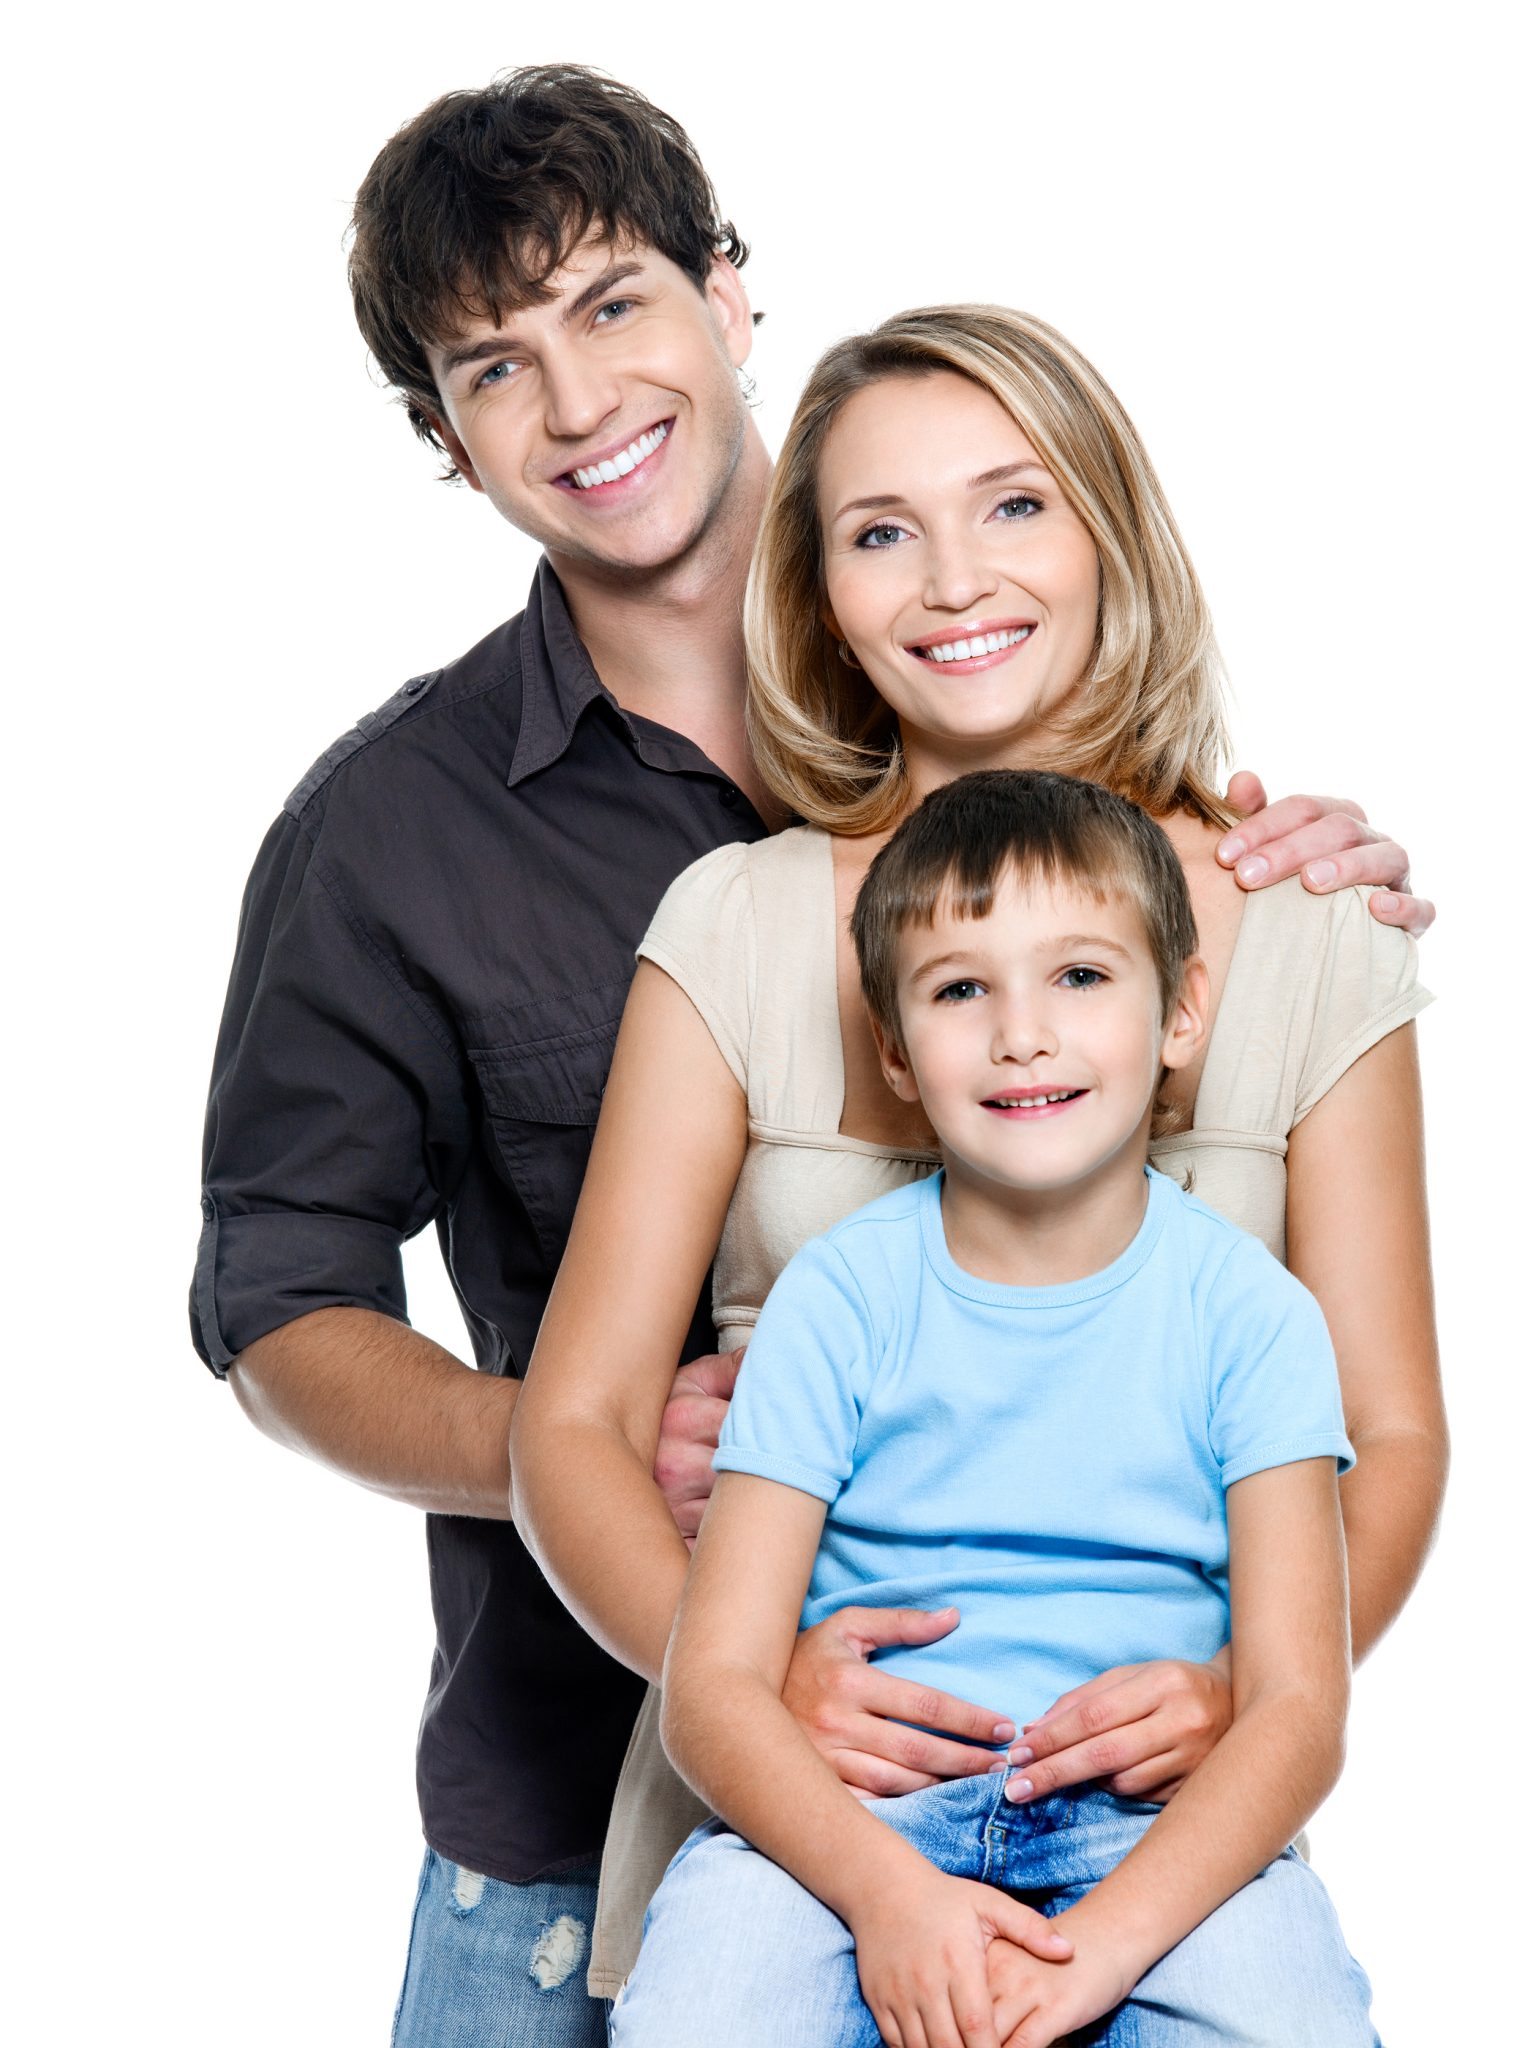 bigstock-Happy-young-family-with-pretty-61650650